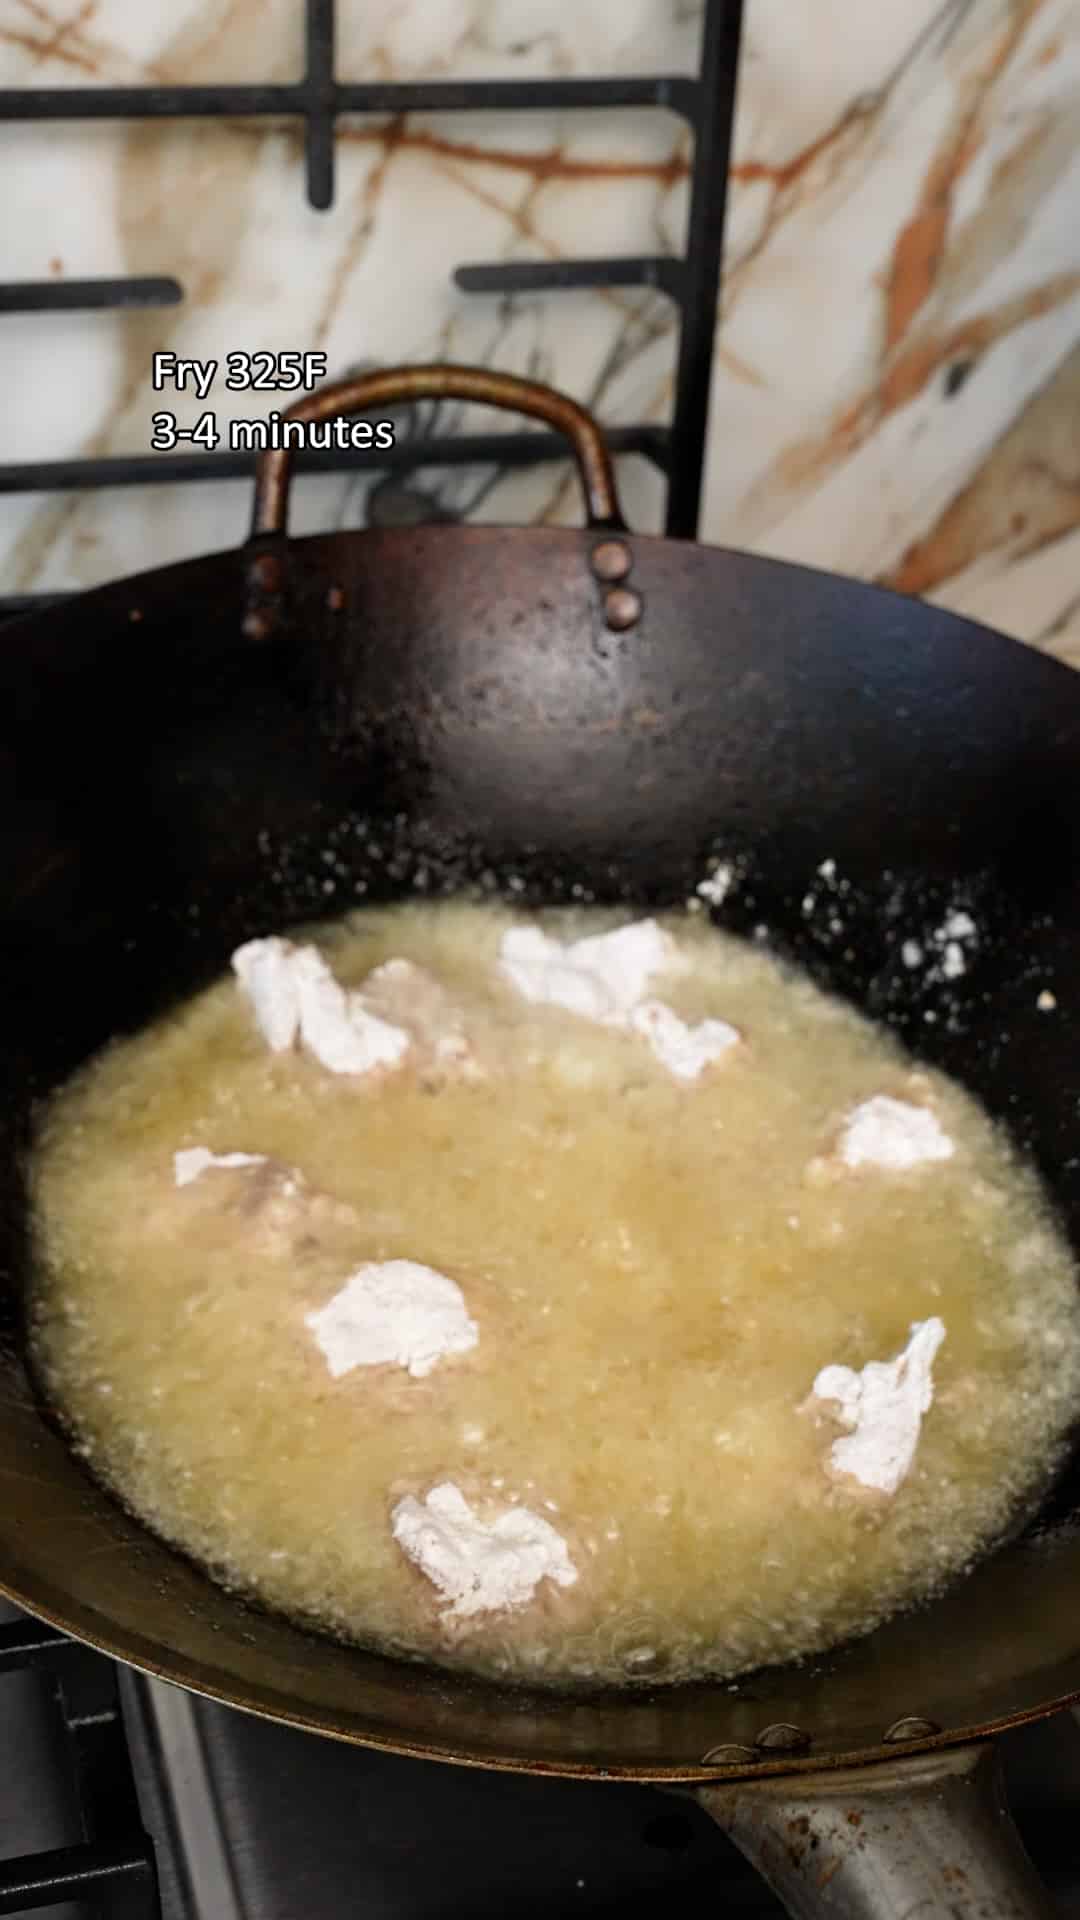 Chicken pieces frying in oil in a wok.